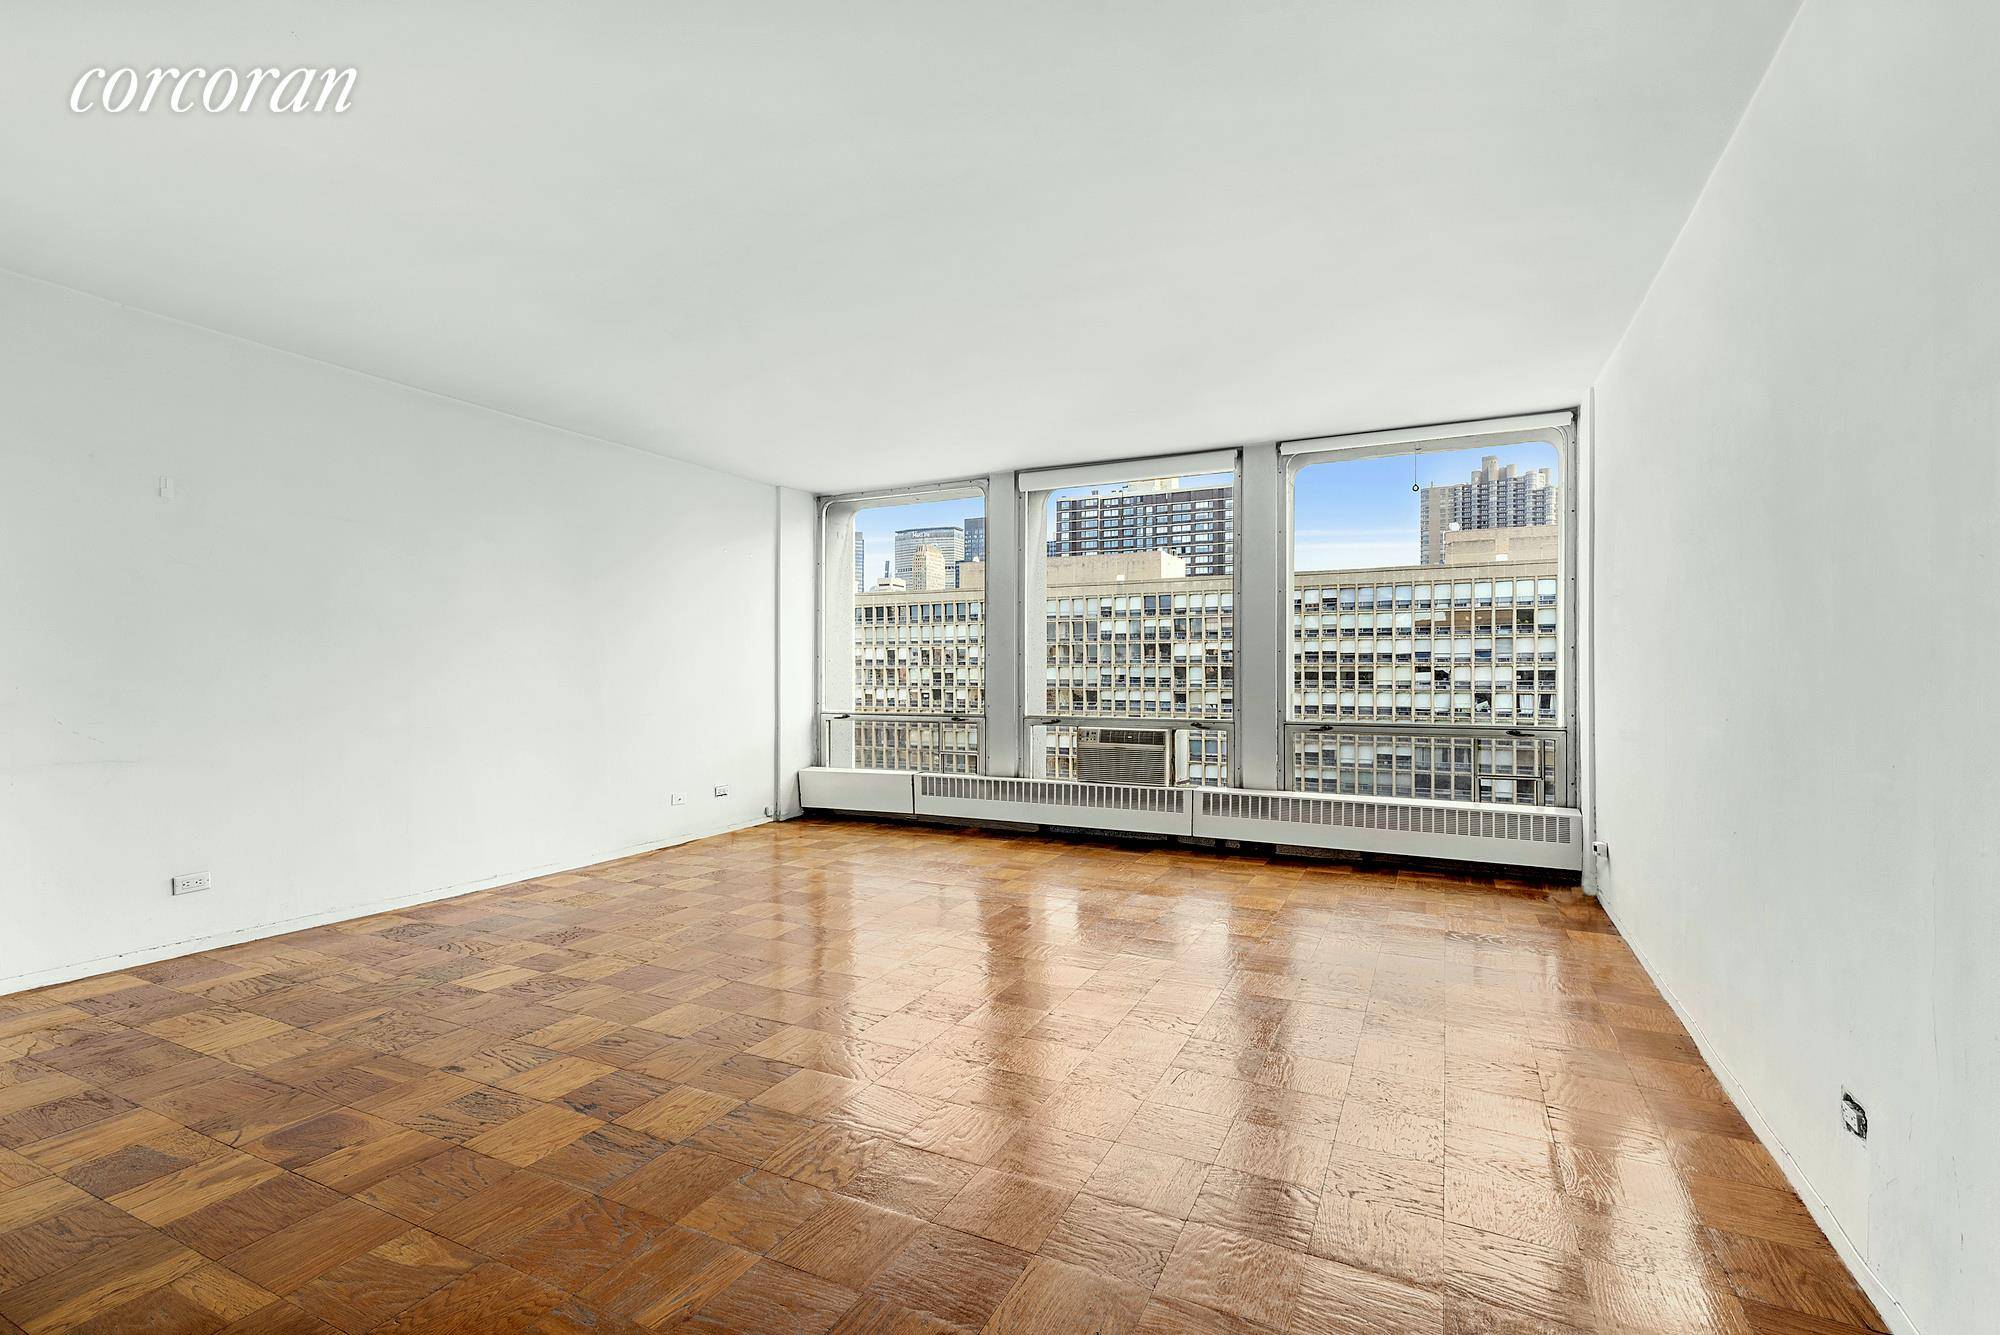 Large 1 bedroom features Open Kitchen with dishwasher, floor to ceiling windows, walk in closet and refinished floors.